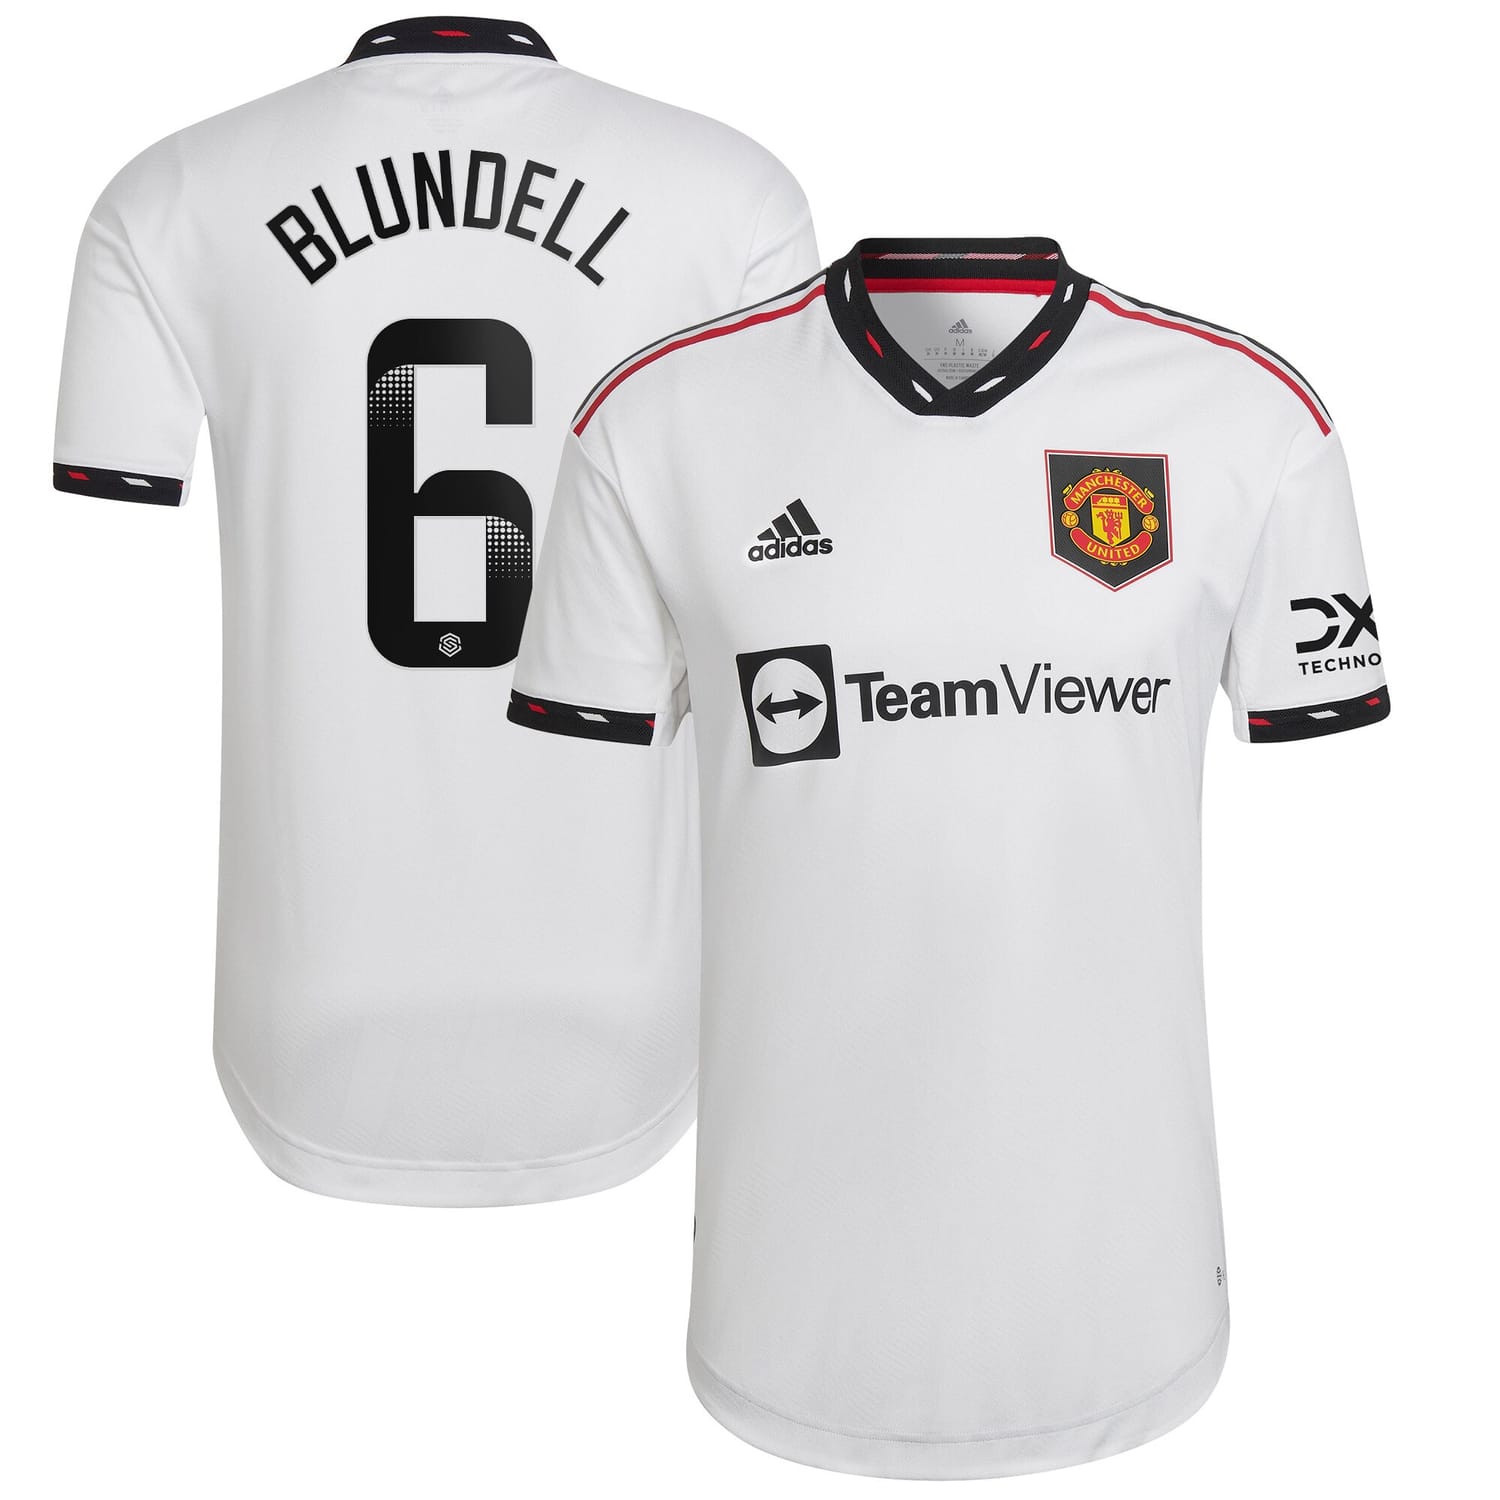 Premier League Manchester United Away WSL Authentic Jersey Shirt 2022-23 player Hannah Blundell 6 printing for Men